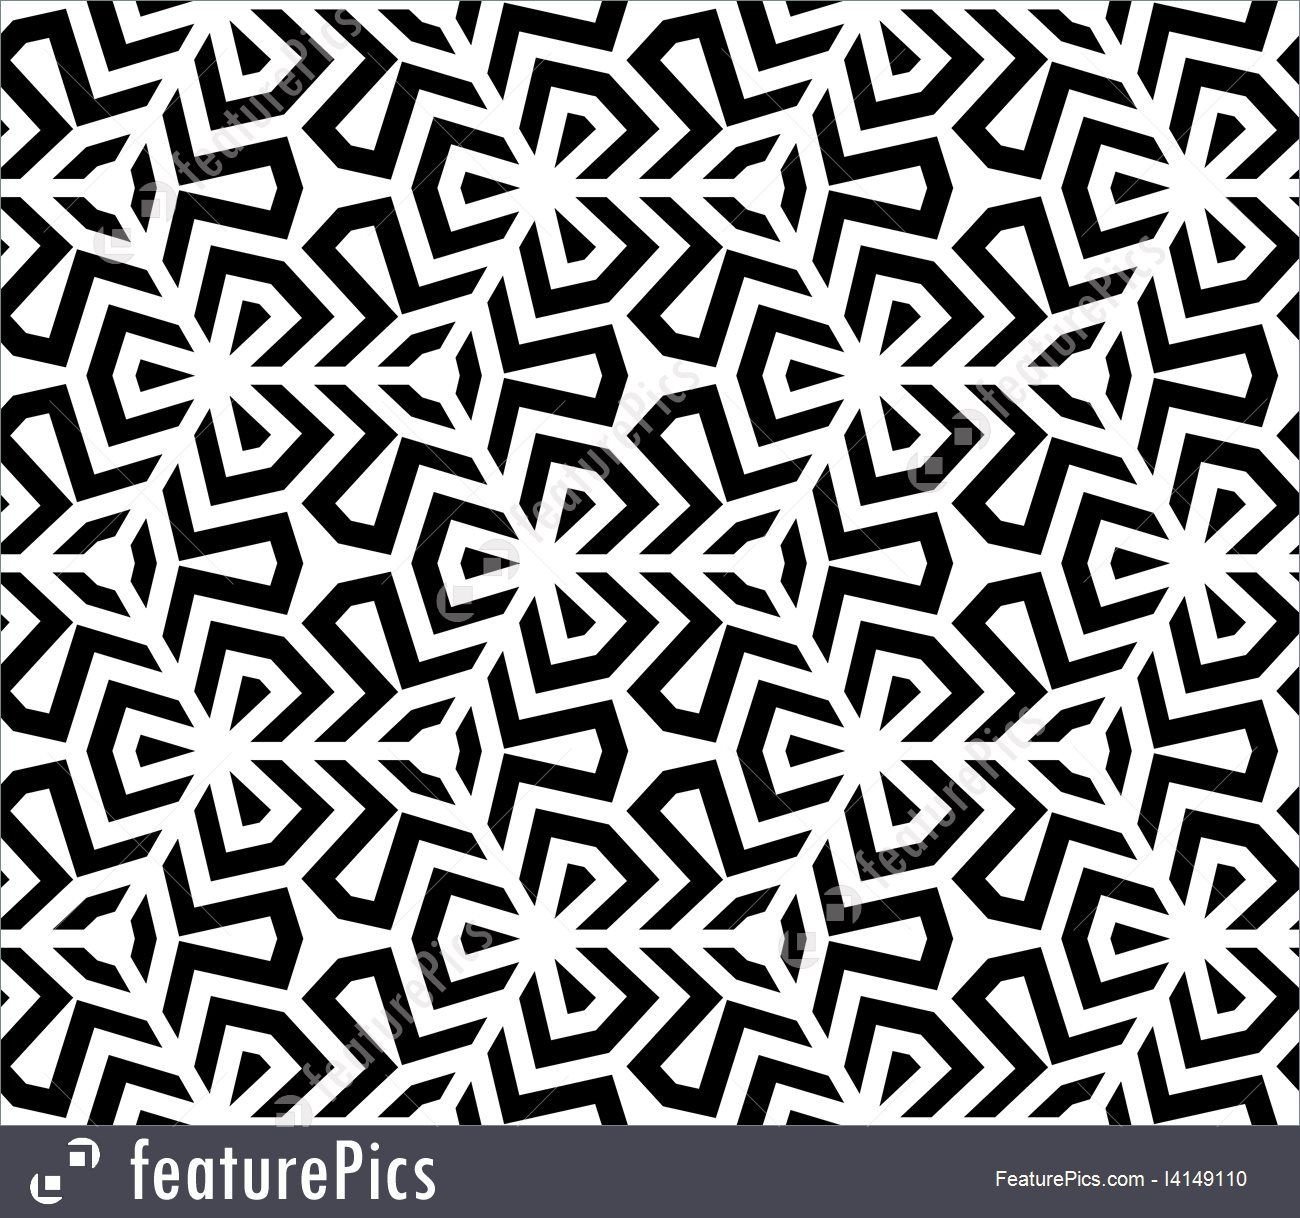 Abstract Patterns Seamless Black And White Geometric